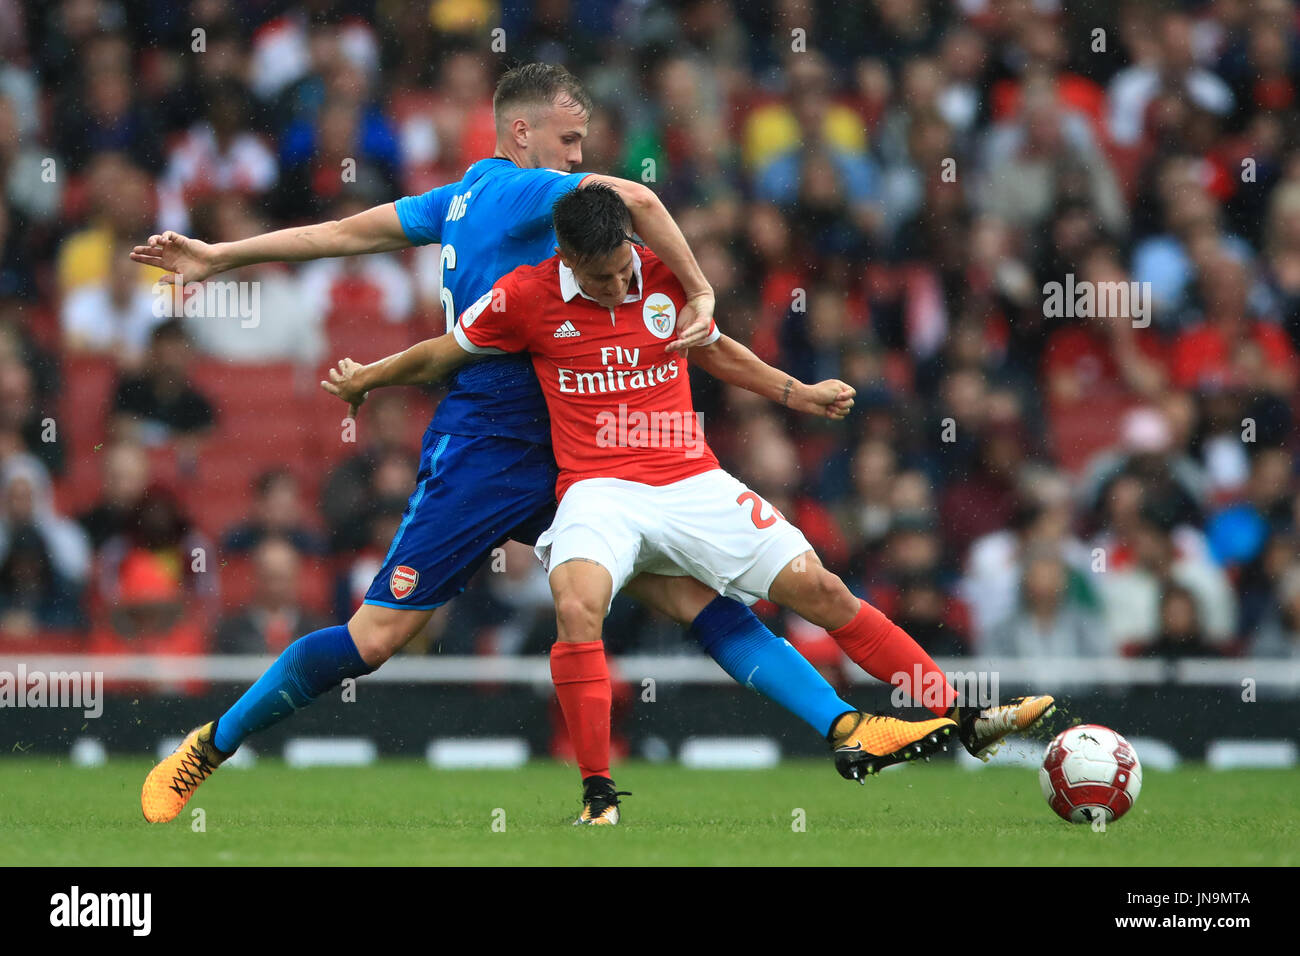 Benfica's Franco Cervi (left) and Arsenal's Rob Holding battle for the ball during the Emirates Cup match at the Emirates Stadium, London. Stock Photo